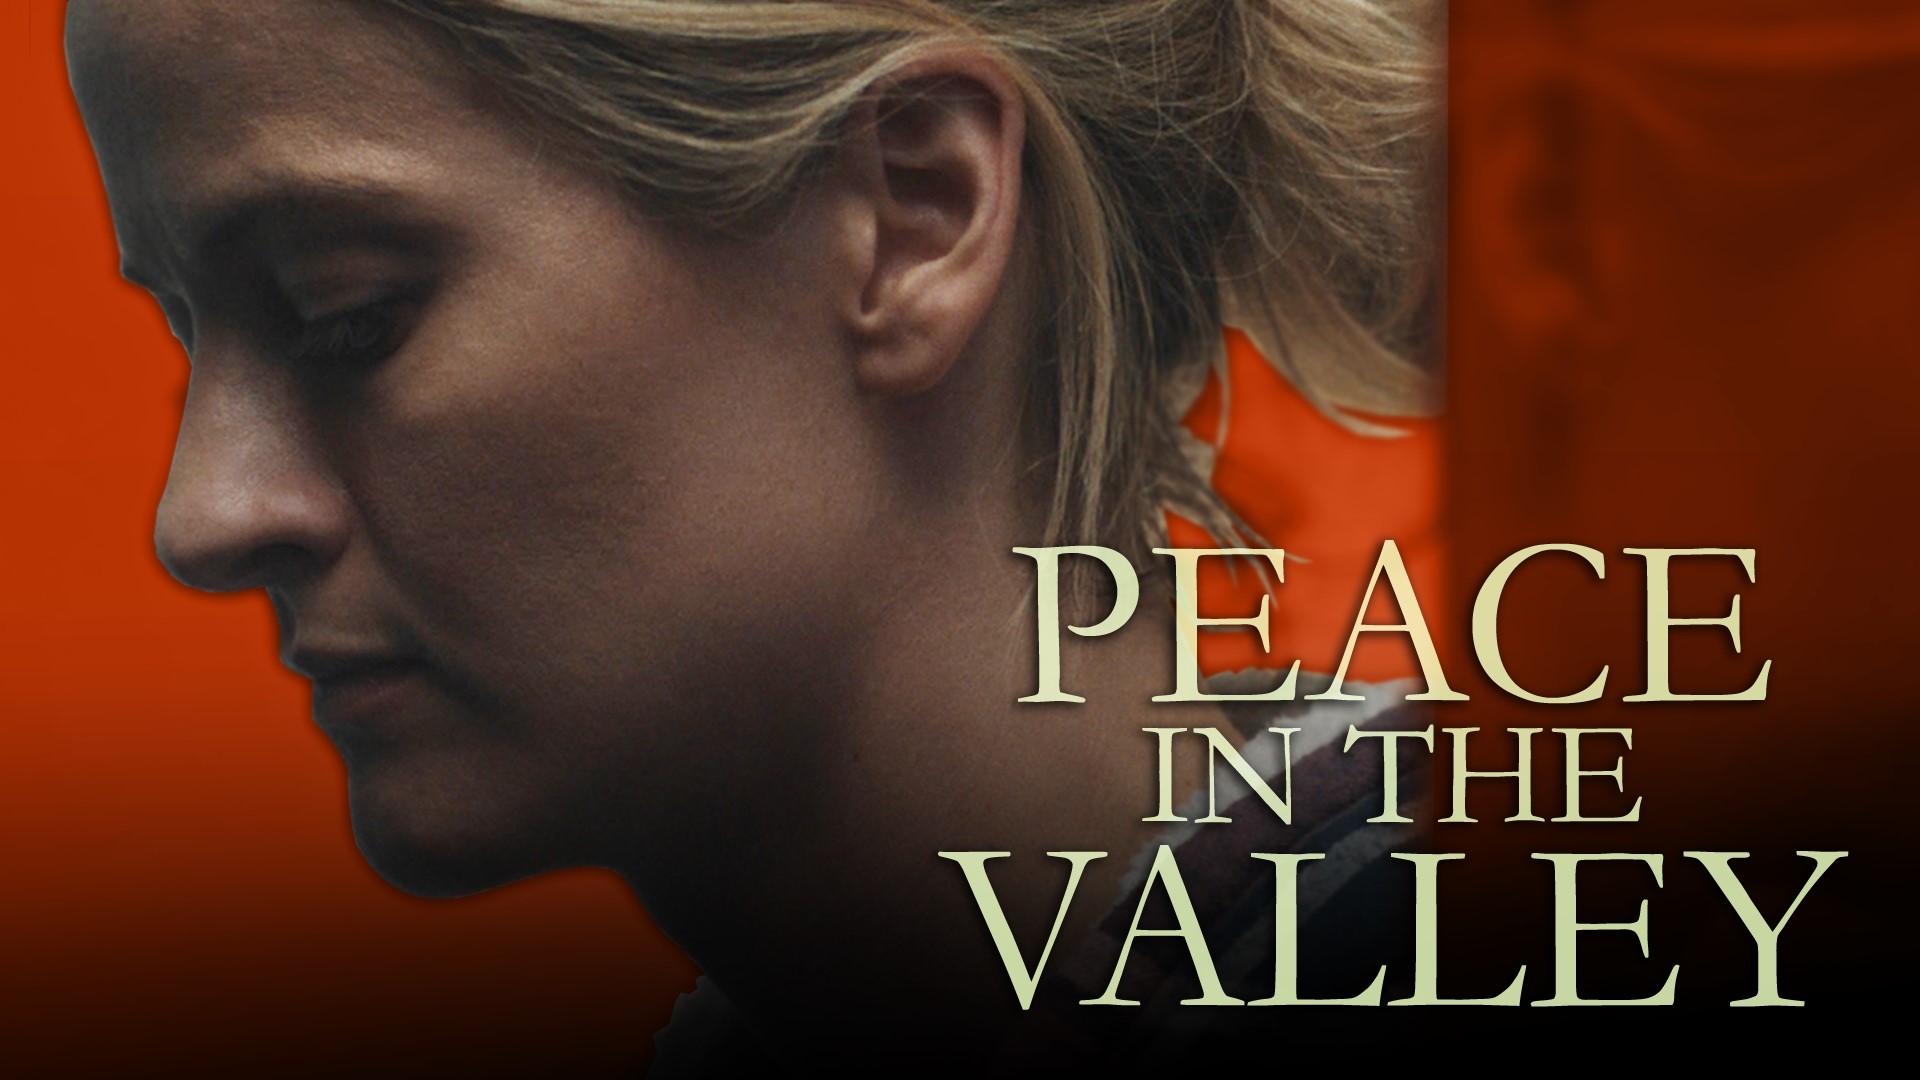 Peace in the Valley, which debuted at the Tribeca Film Festival, is held together by a wonderful performance by Brit Shaw.